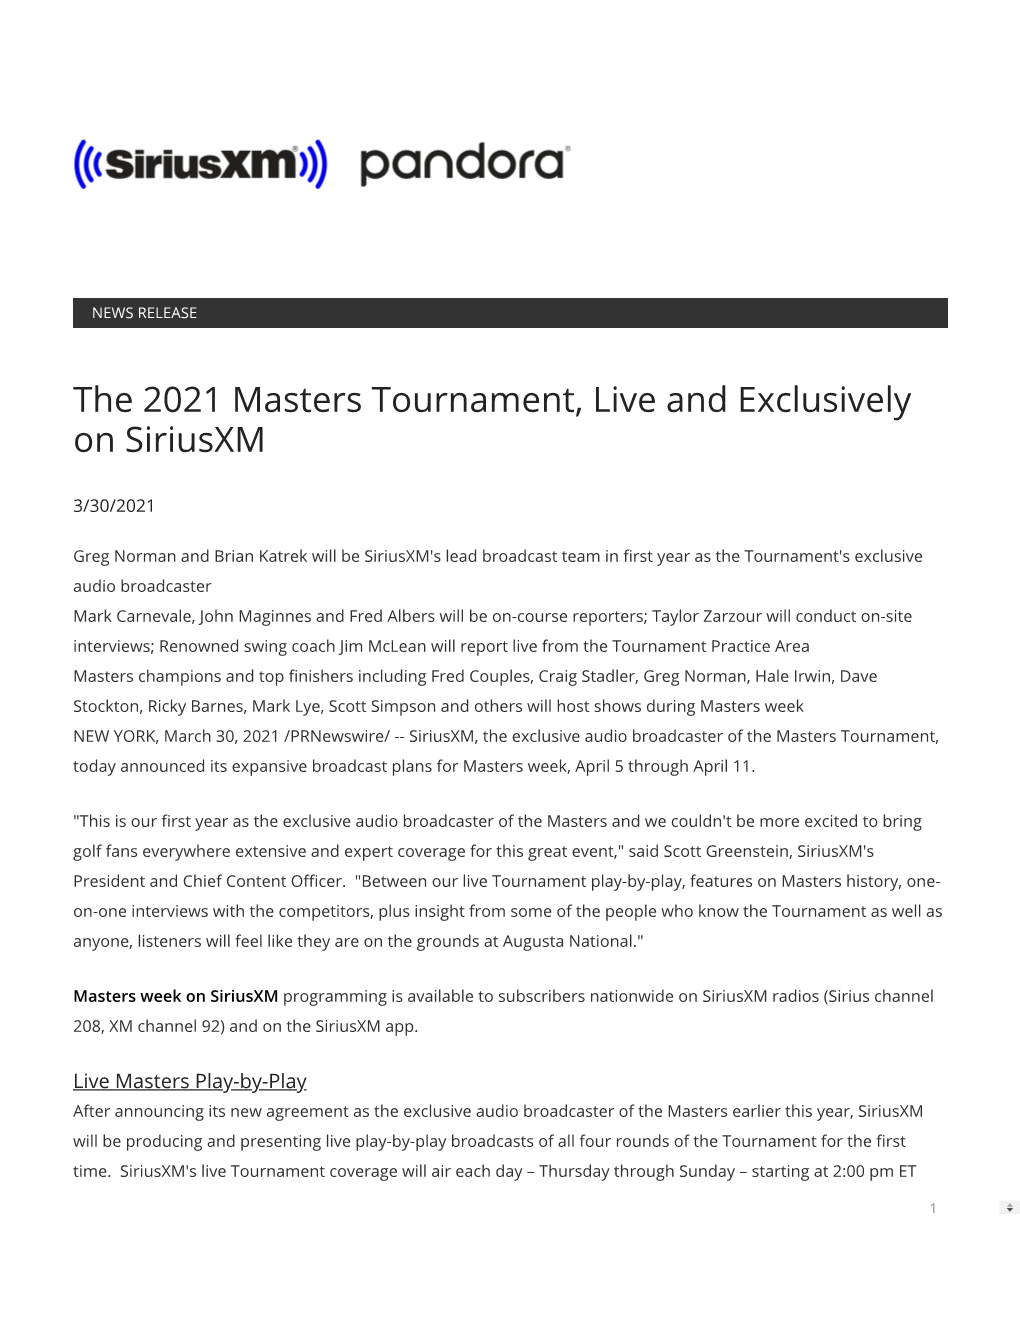 The 2021 Masters Tournament, Live and Exclusively on Siriusxm